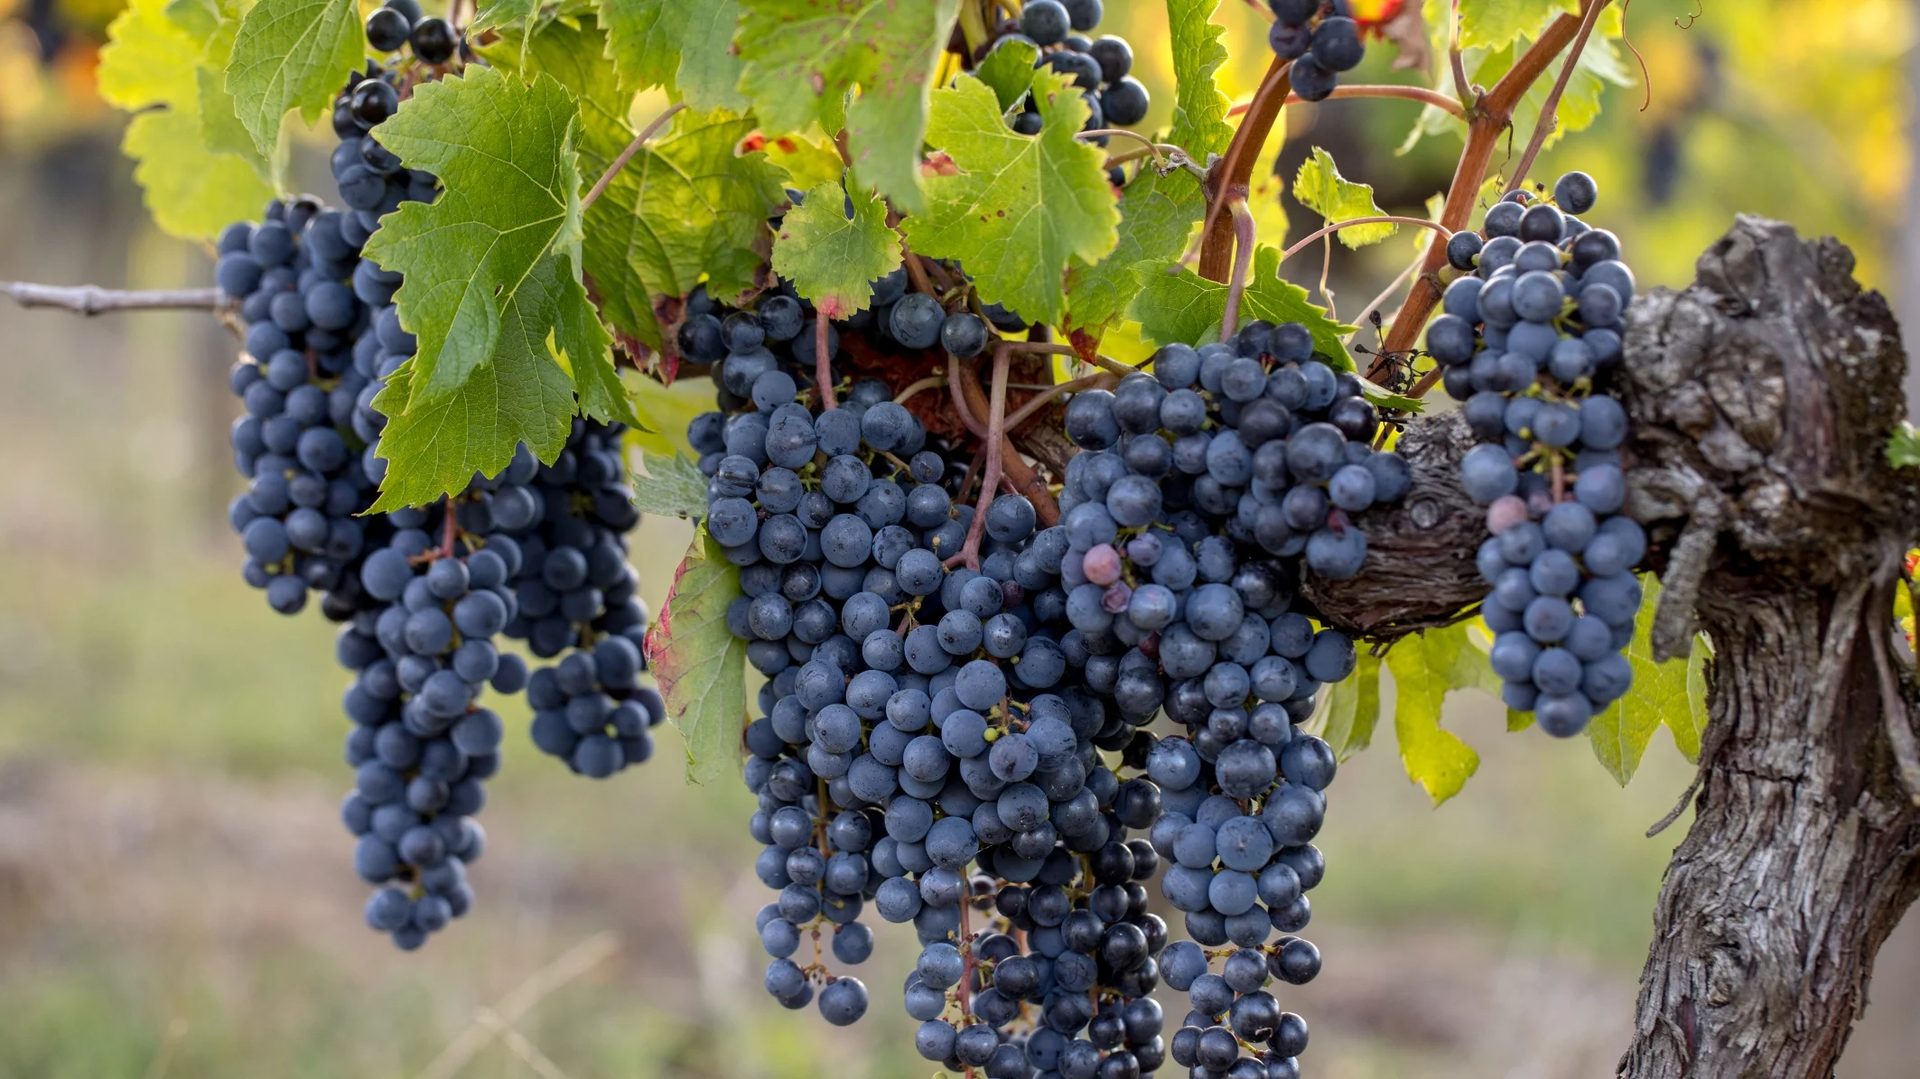 Guide: Types of Wine - Merlot grapes